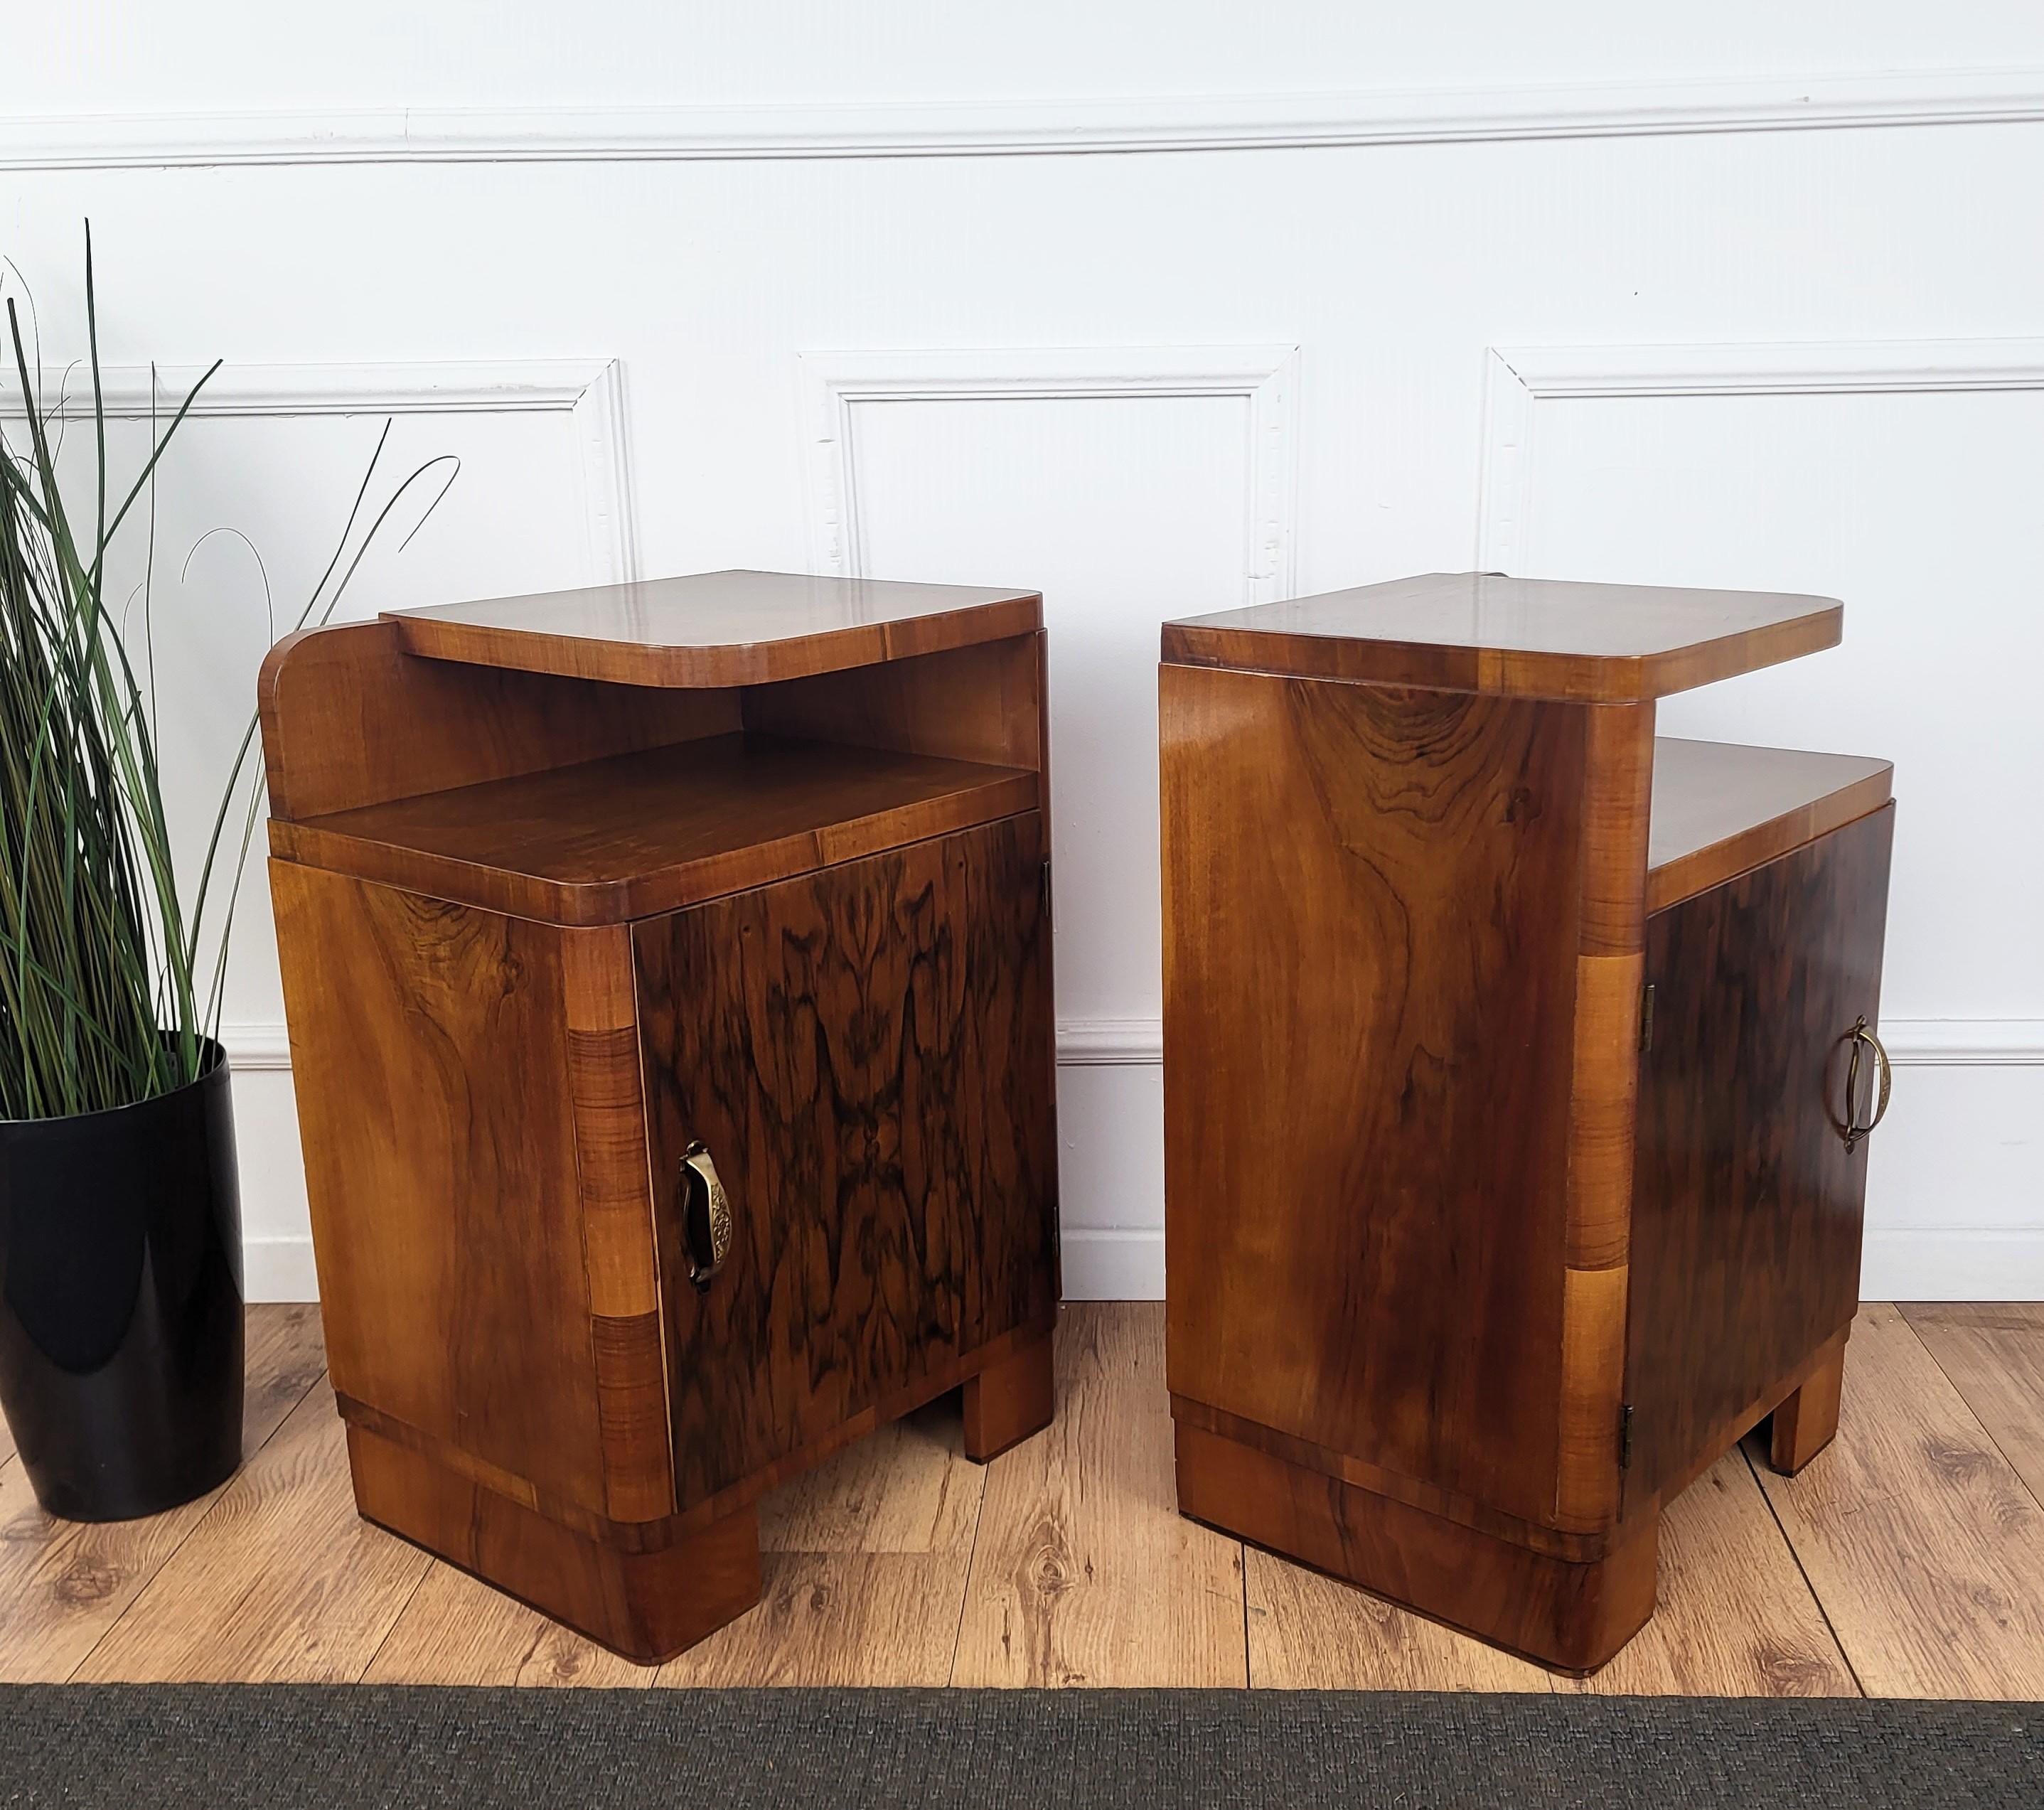 Brass Pair of Italian Art Deco Night Stands Bed Side Tables in Burl Walnut